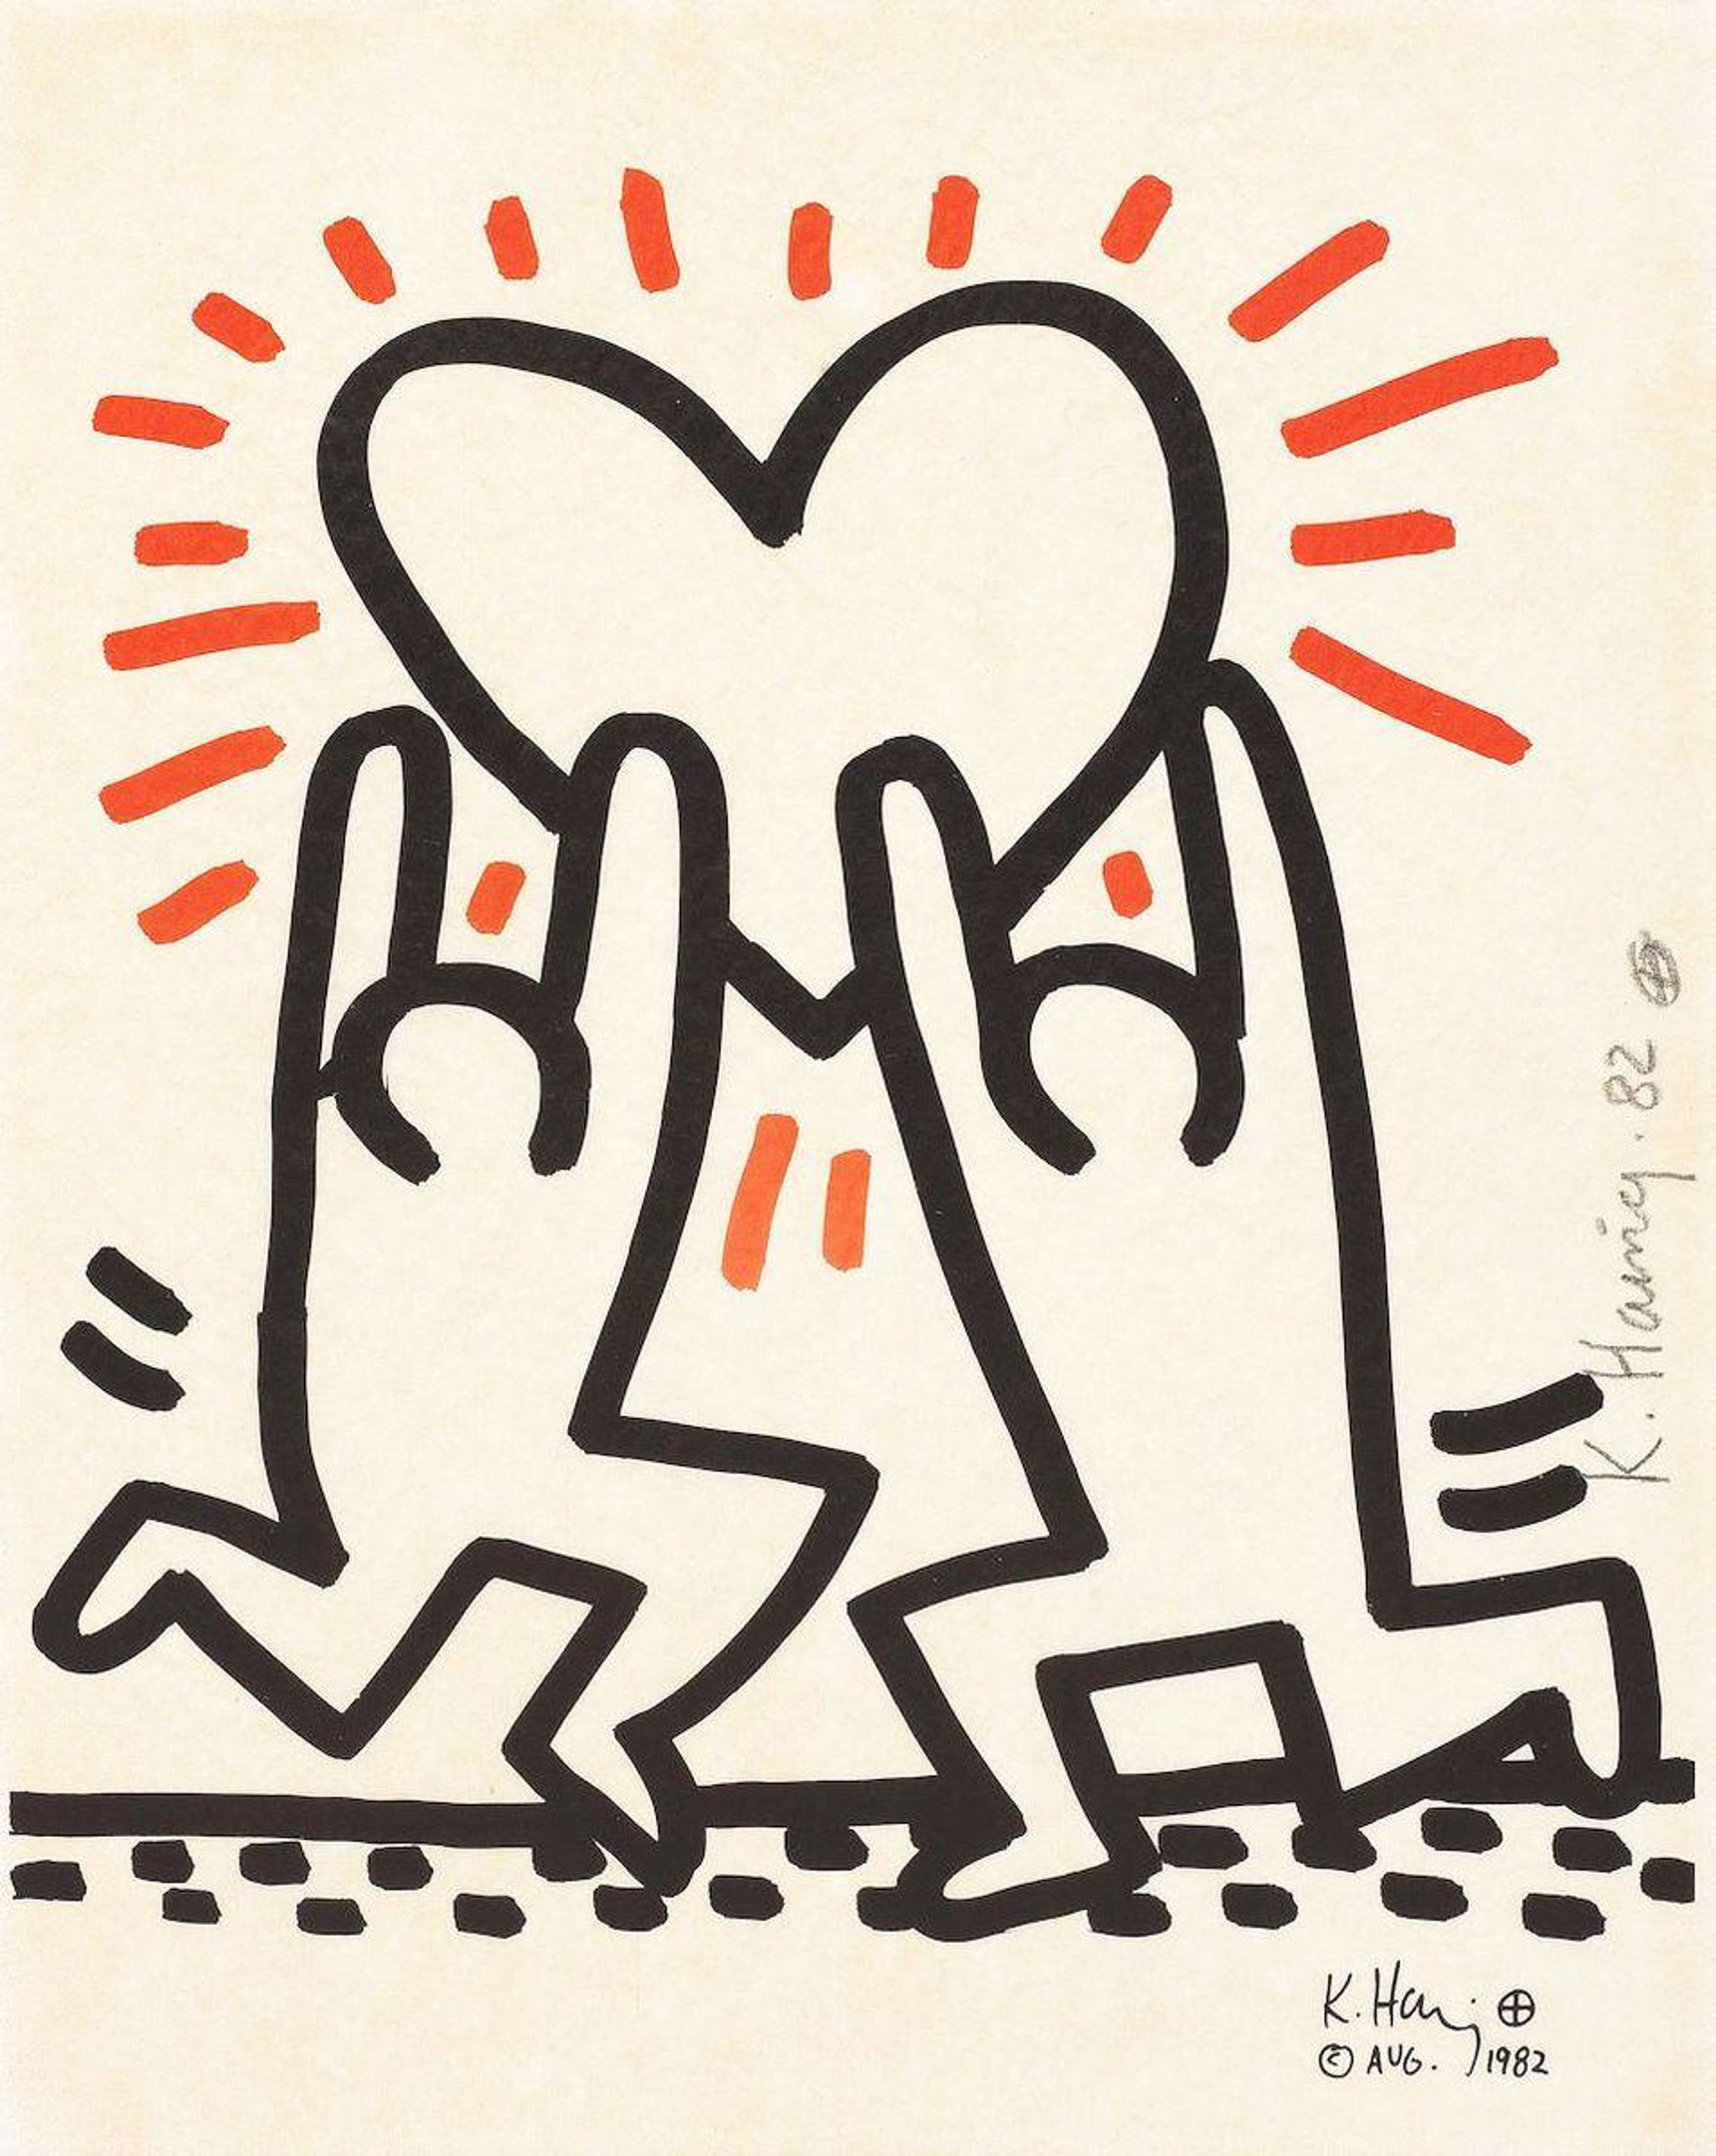 Bayer Suite 1 by Keith Haring. Two cartoon figures are deipcted with arms up in front of a heart, with radiating red lines.